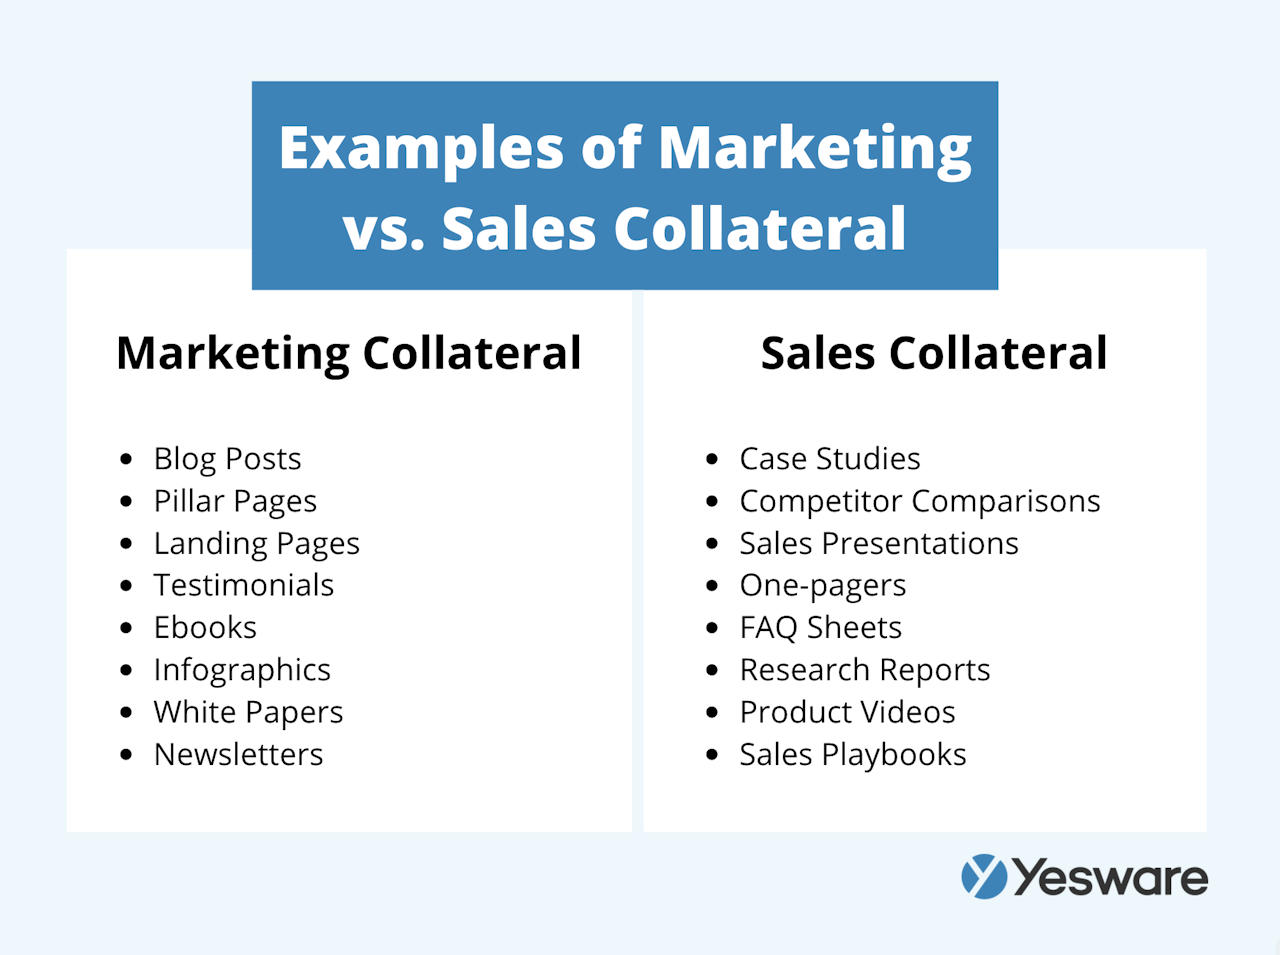 Sales collateral vs marketing collateral 